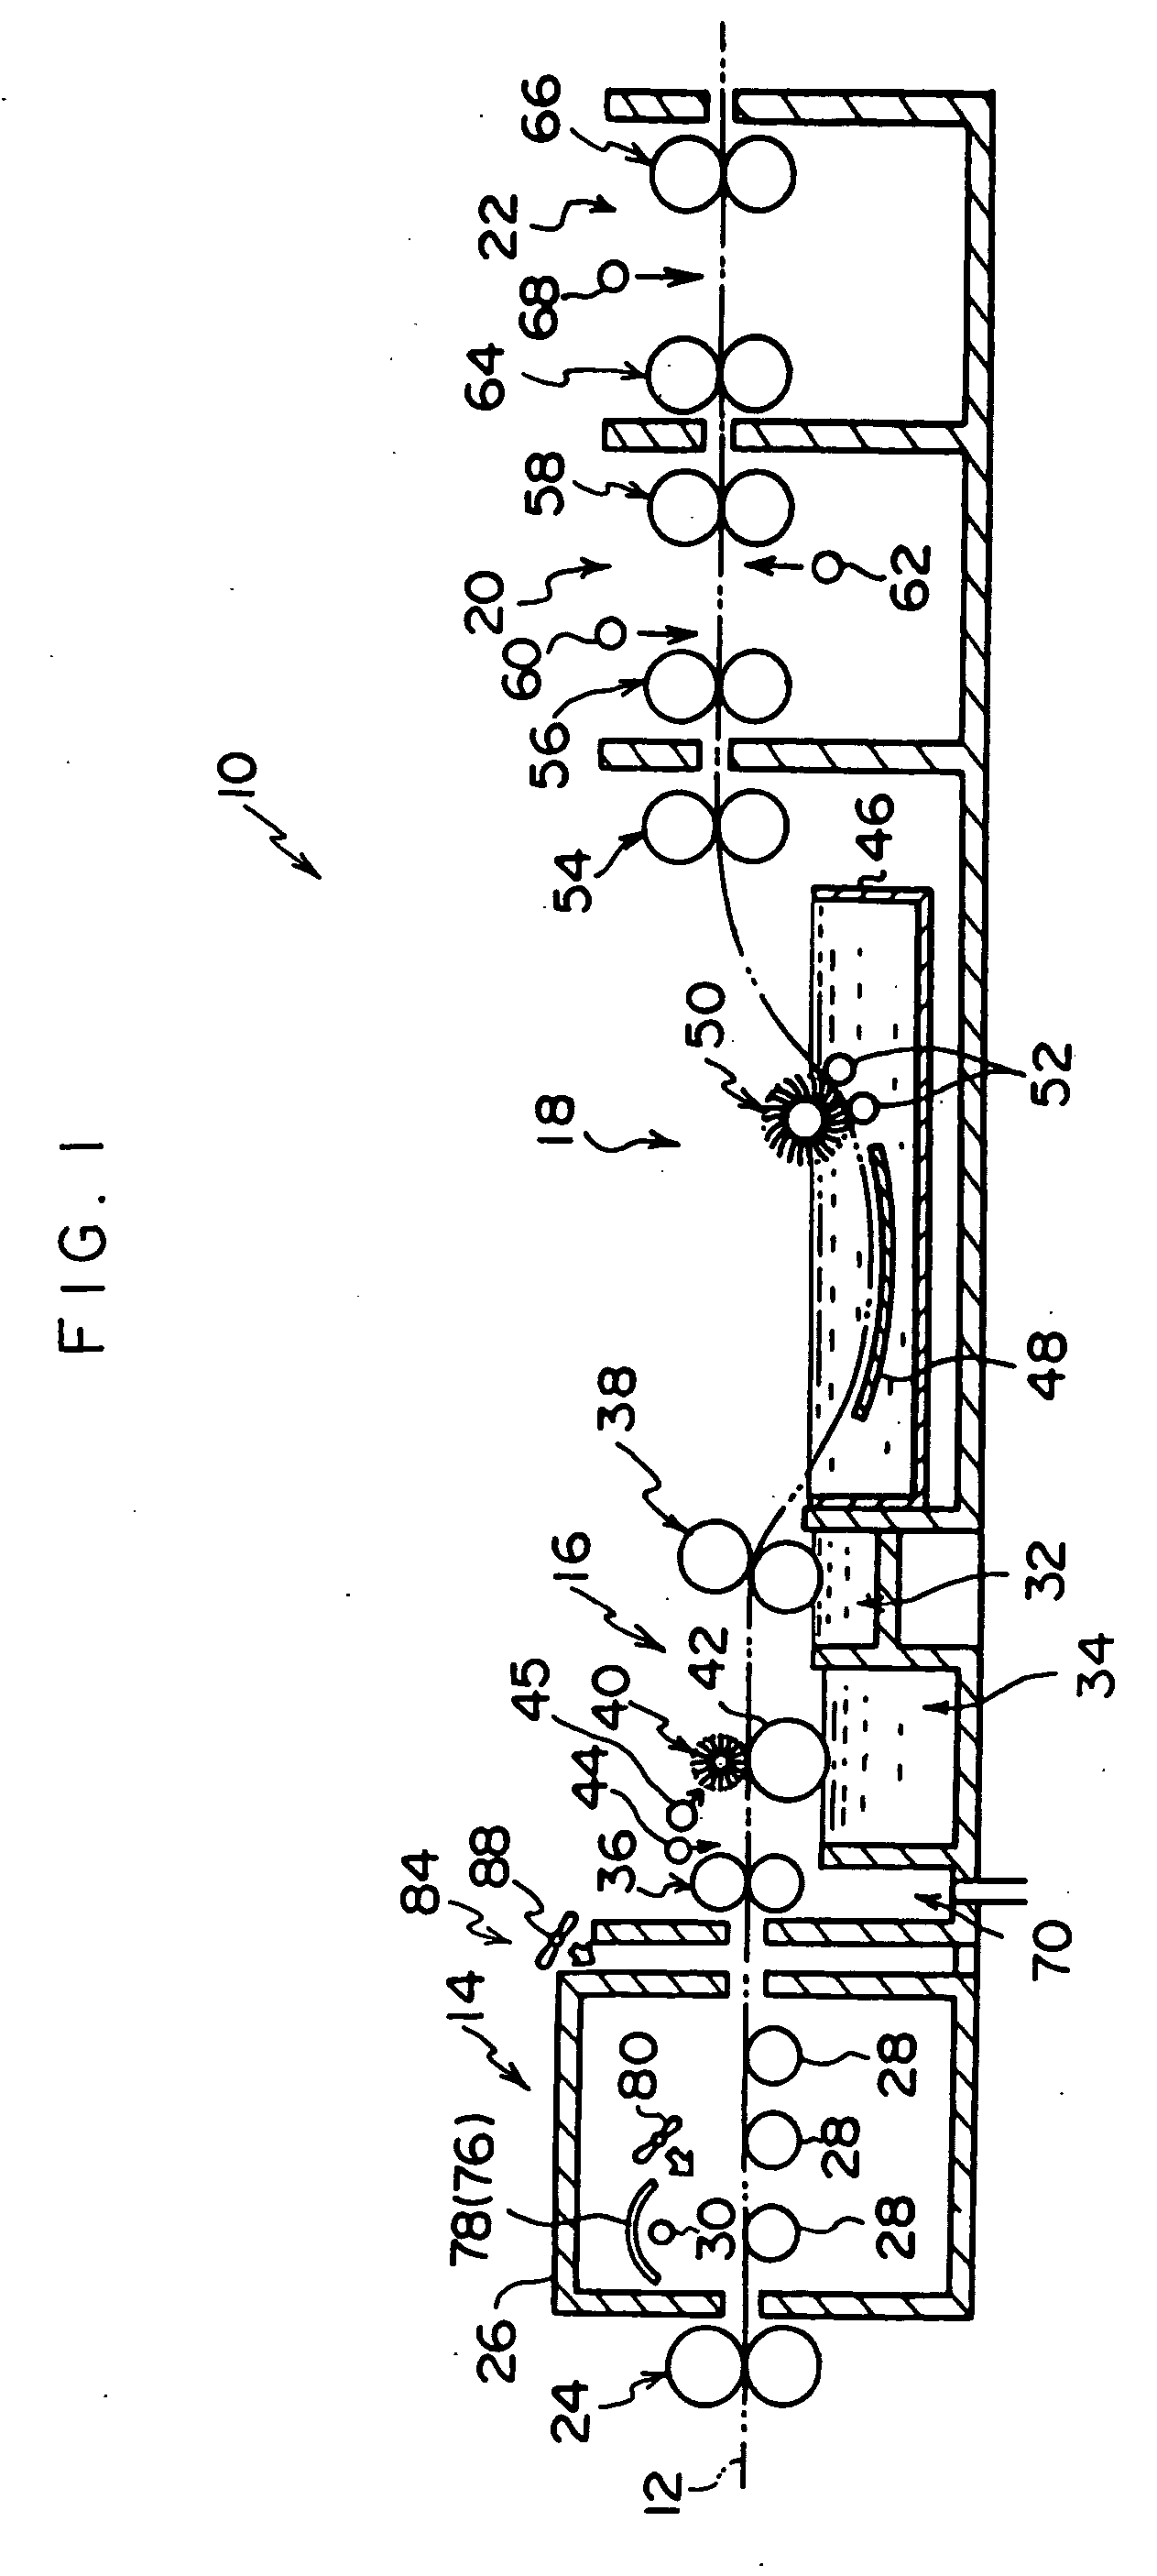 Automatic developing device, roller washing method, photosensitive material processing device, and preparation method for processing liquid